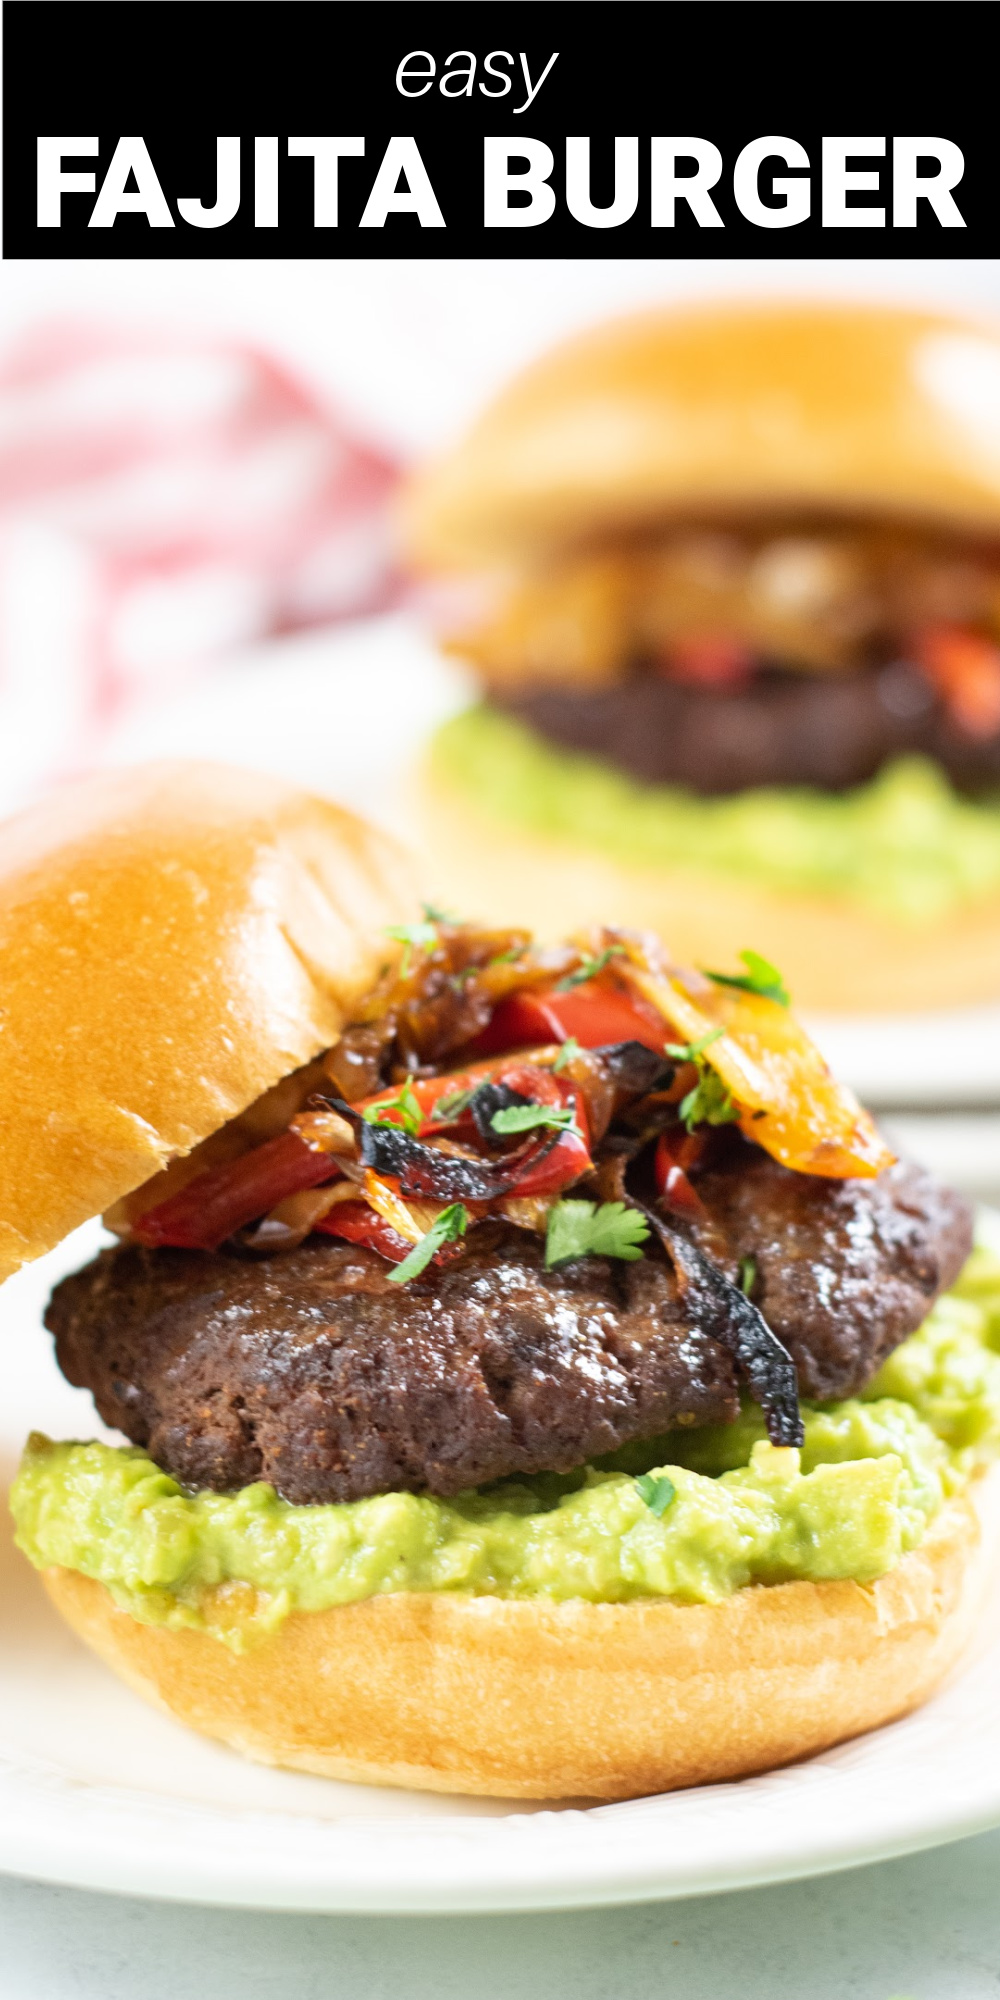 Fajita burgers are so delicious, they're perfect for summertime meals. Get all those amazing flavors in these thick and juicy homemade beef burgers. Put them on soft burger buns, and top with fajita vegetables, salsa verde guacamole, and your favorite burger salad.